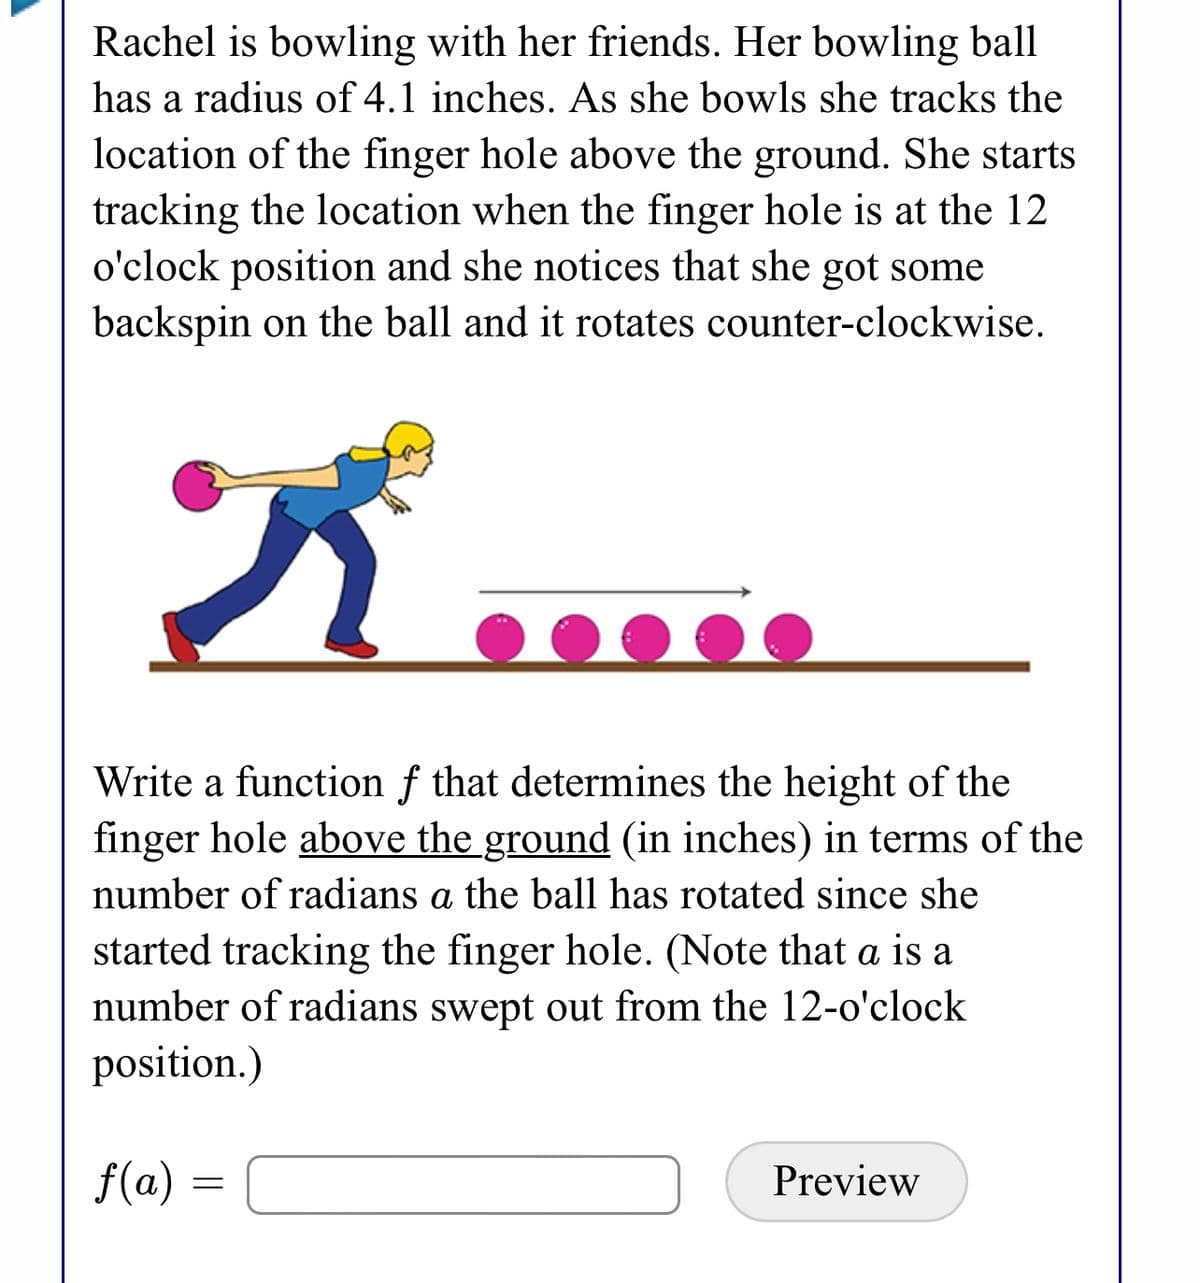 Rachel is bowling with her friends. Her bowling ball
has a radius of 4.1 inches. As she bowls she tracks the
location of the finger hole above the ground. She starts
tracking the location when the finger hole is at the 12
o'clock position and she notices that she got some
backspin on the ball and it rotates counter-clockwise.
Write a function f that determines the height of the
finger hole above the ground (in inches) in terms of the
number of radians a the ball has rotated since she
started tracking the finger hole. (Note that a is a
number of radians swept out from the 12-o'clock
position.)
f(a) =
Preview
